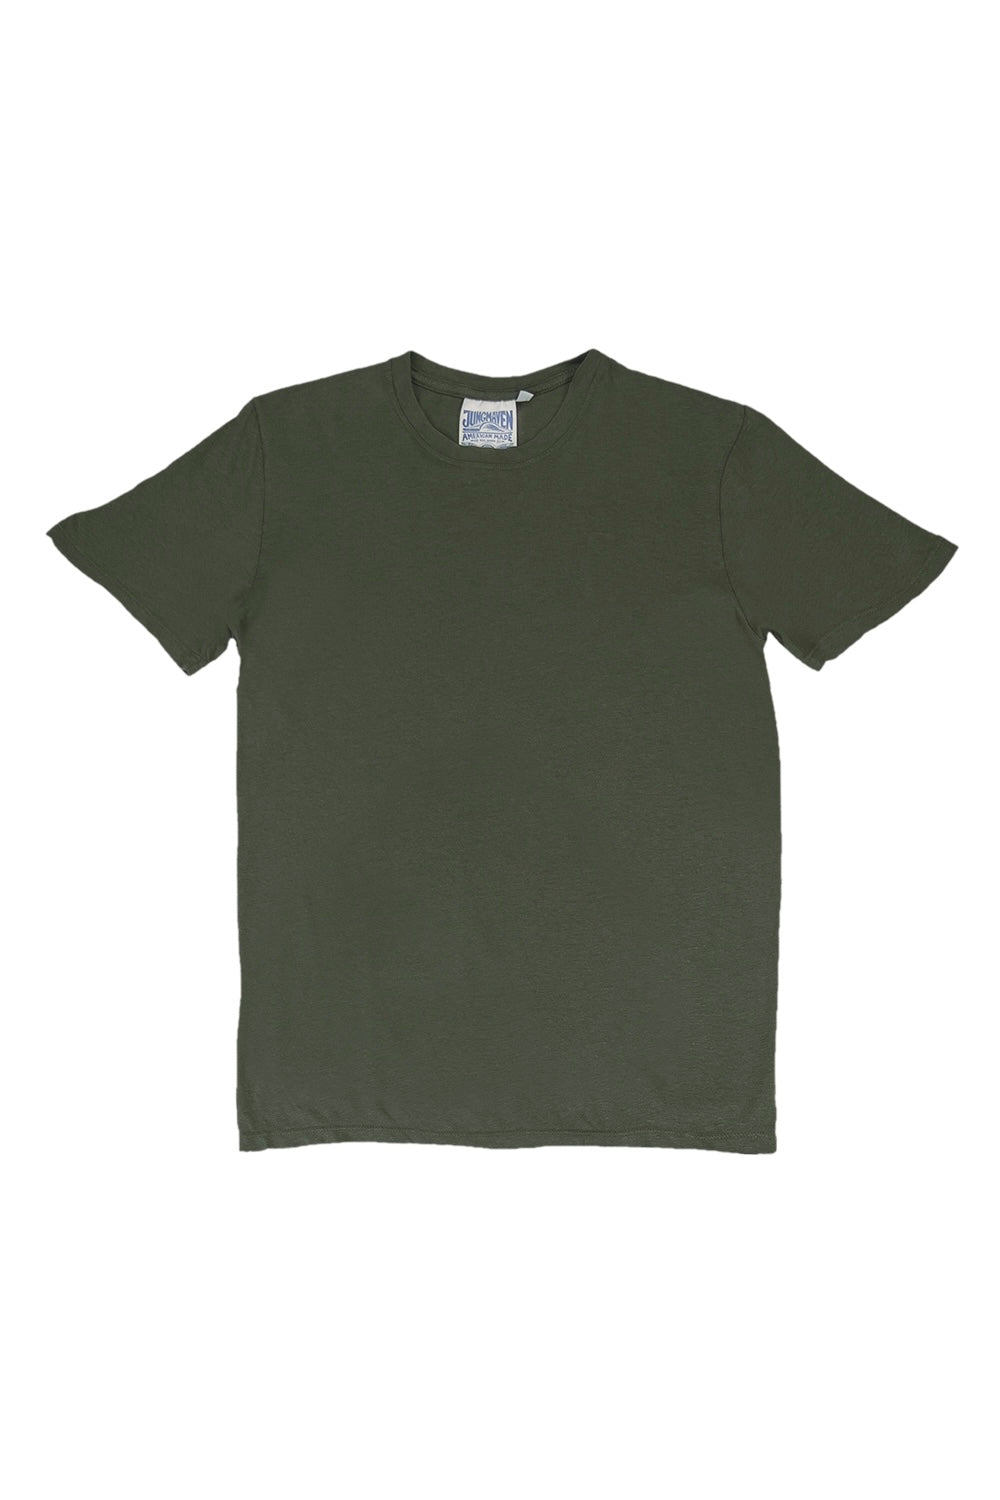 Basic Tee | Jungmaven Hemp Clothing & Accessories / Color: Olive Green